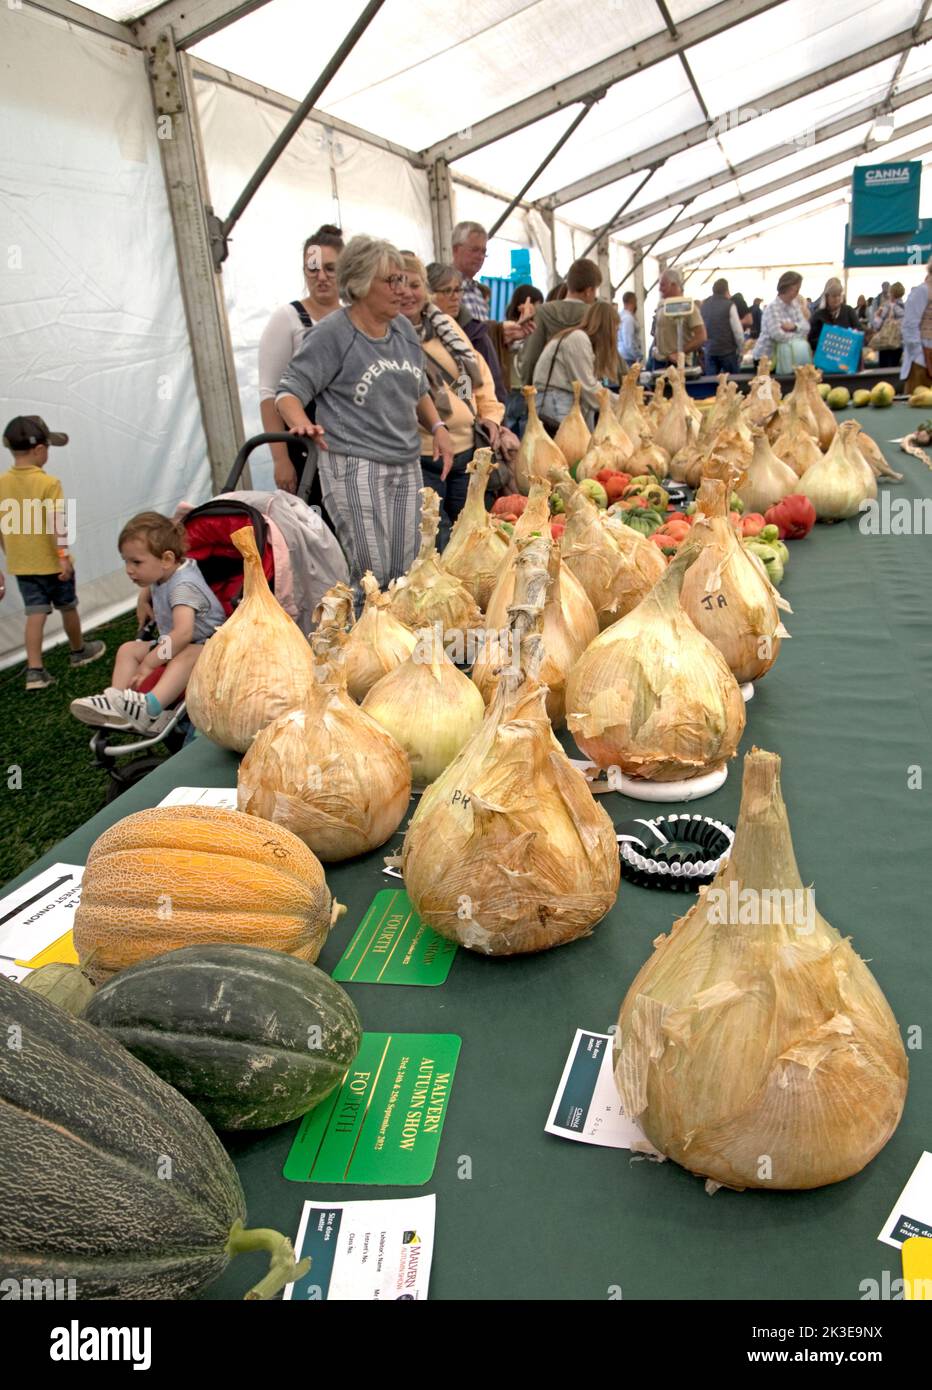 Visitors looking a giant onions some of the giant vegetables at Three Counties Autumn Show  Great Malvern, UK Stock Photo